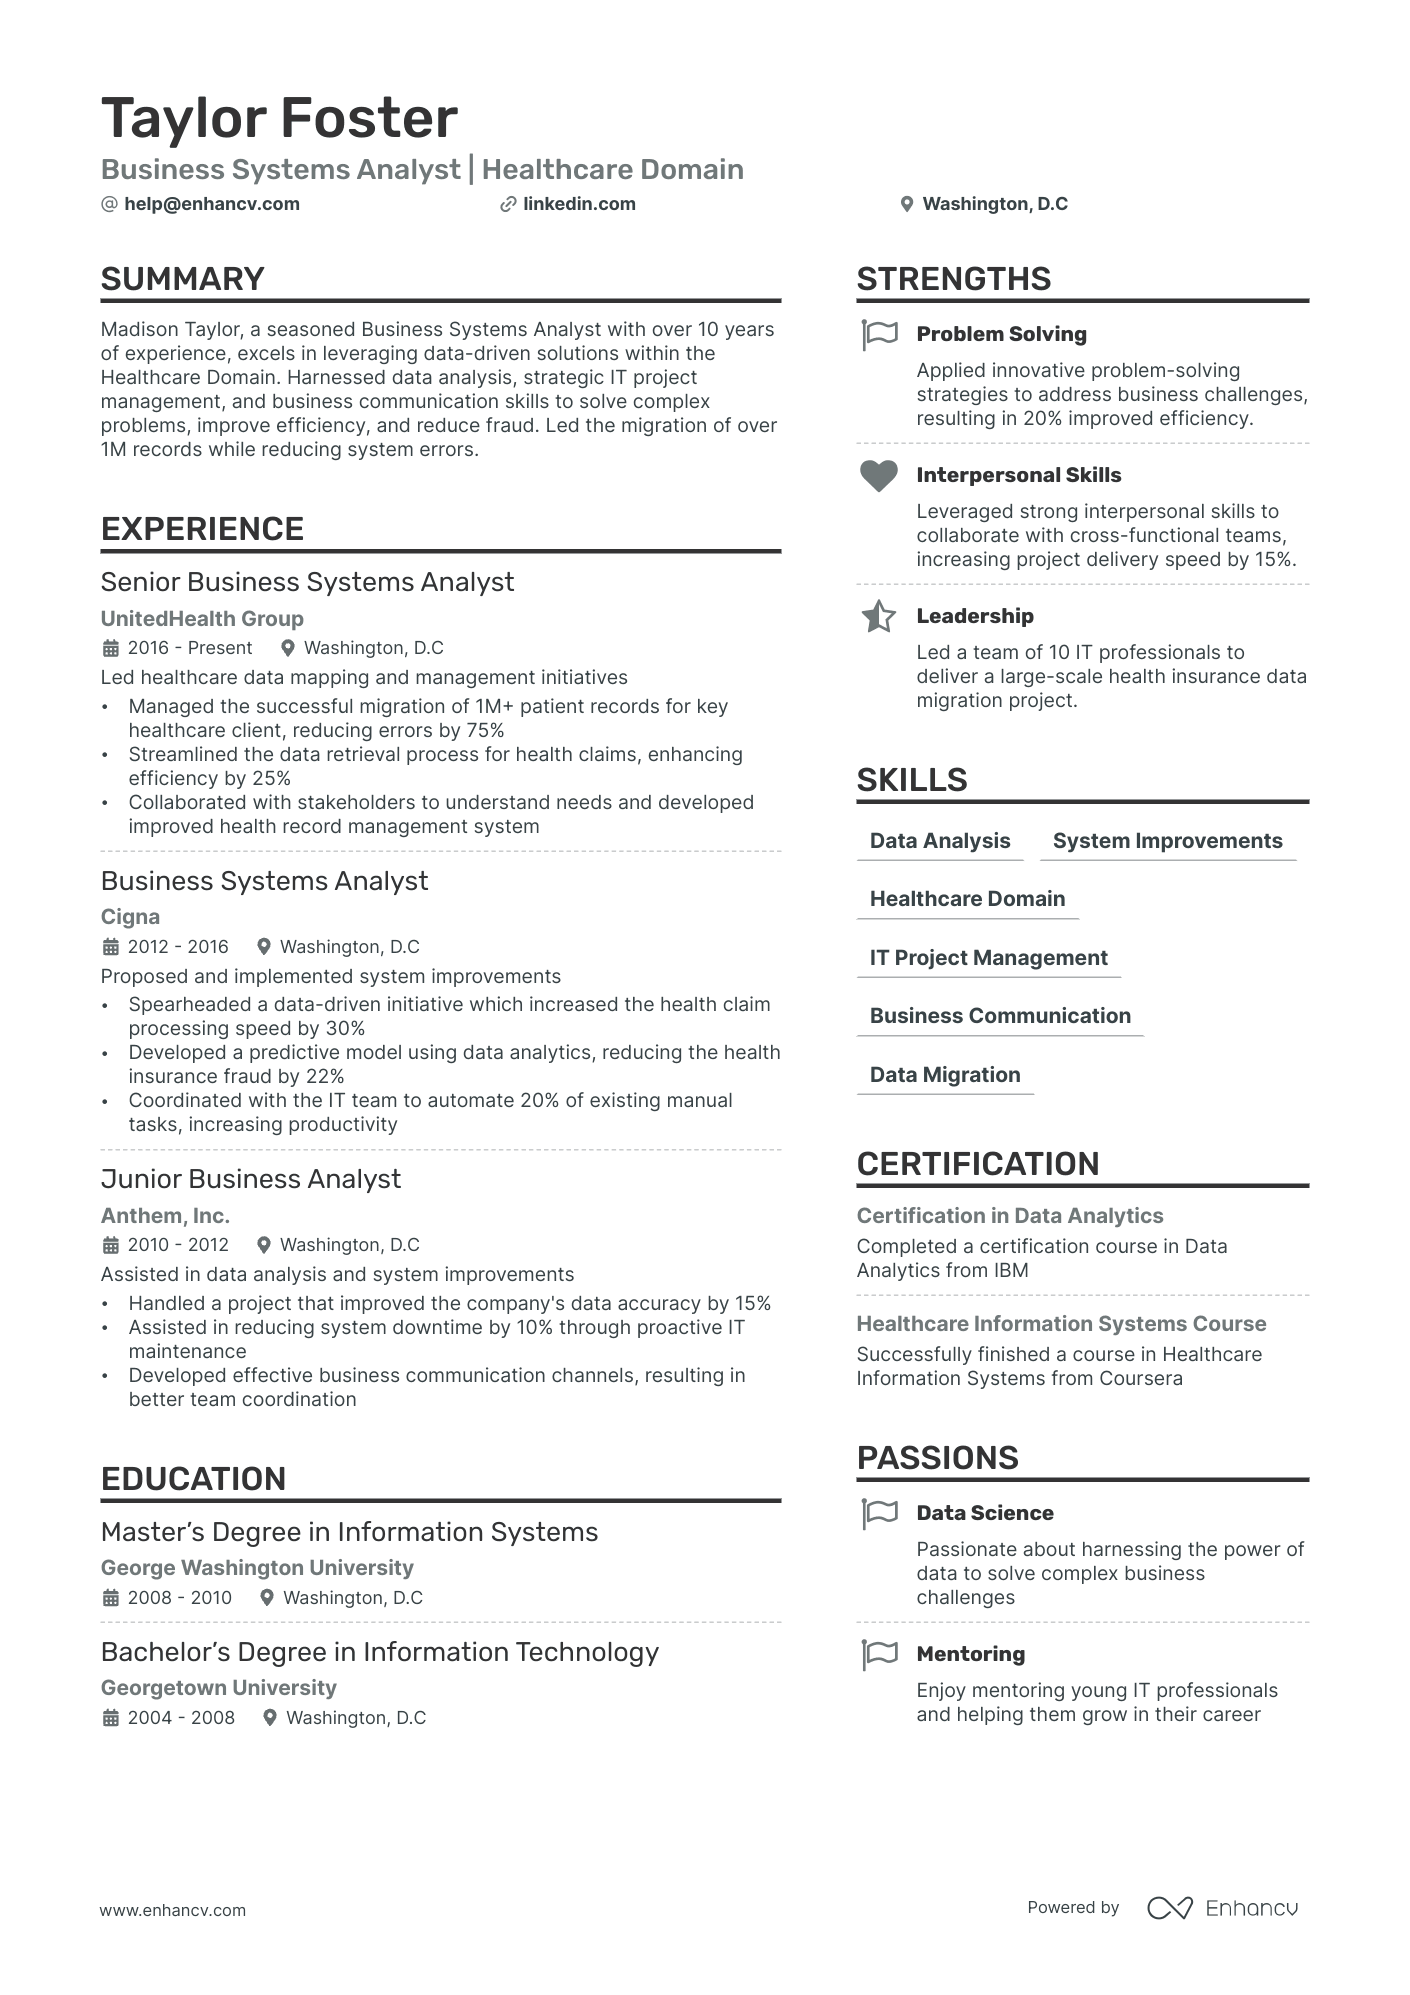 Business System Analyst resume example